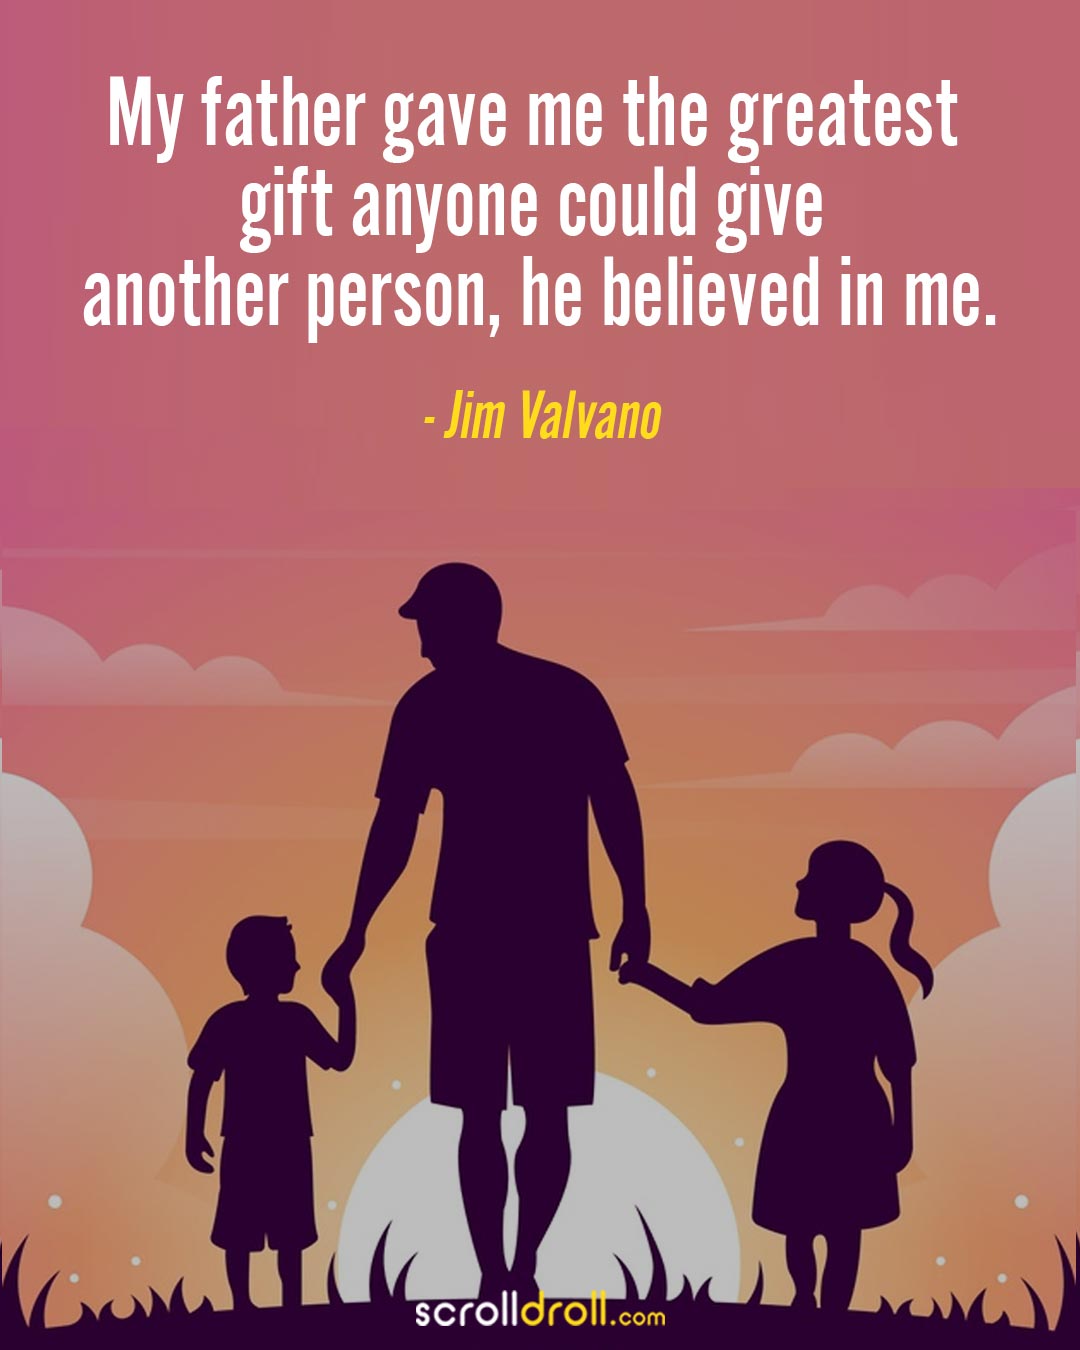 These 20 Dad Quotes Will Warm Your Heart This Father's Day!